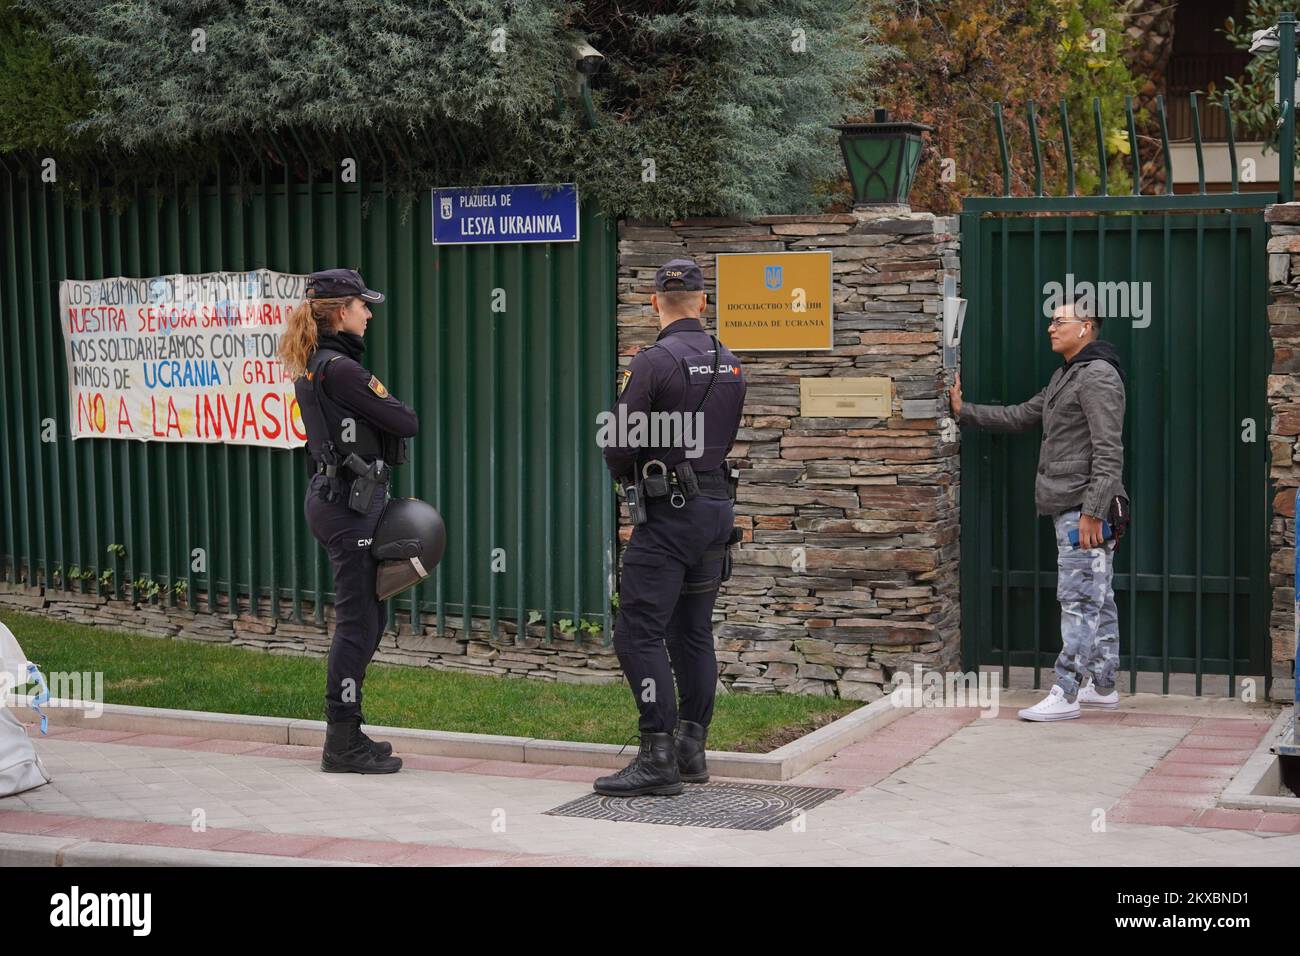 Madrid, Spain. 30th Nov, 2022. Images of the Ukrainian embassy in Madrid where an attack was carried out with an envelope bomb, Madrid November 30, 2022 Credit: CORDON PRESS/Alamy Live News Stock Photo